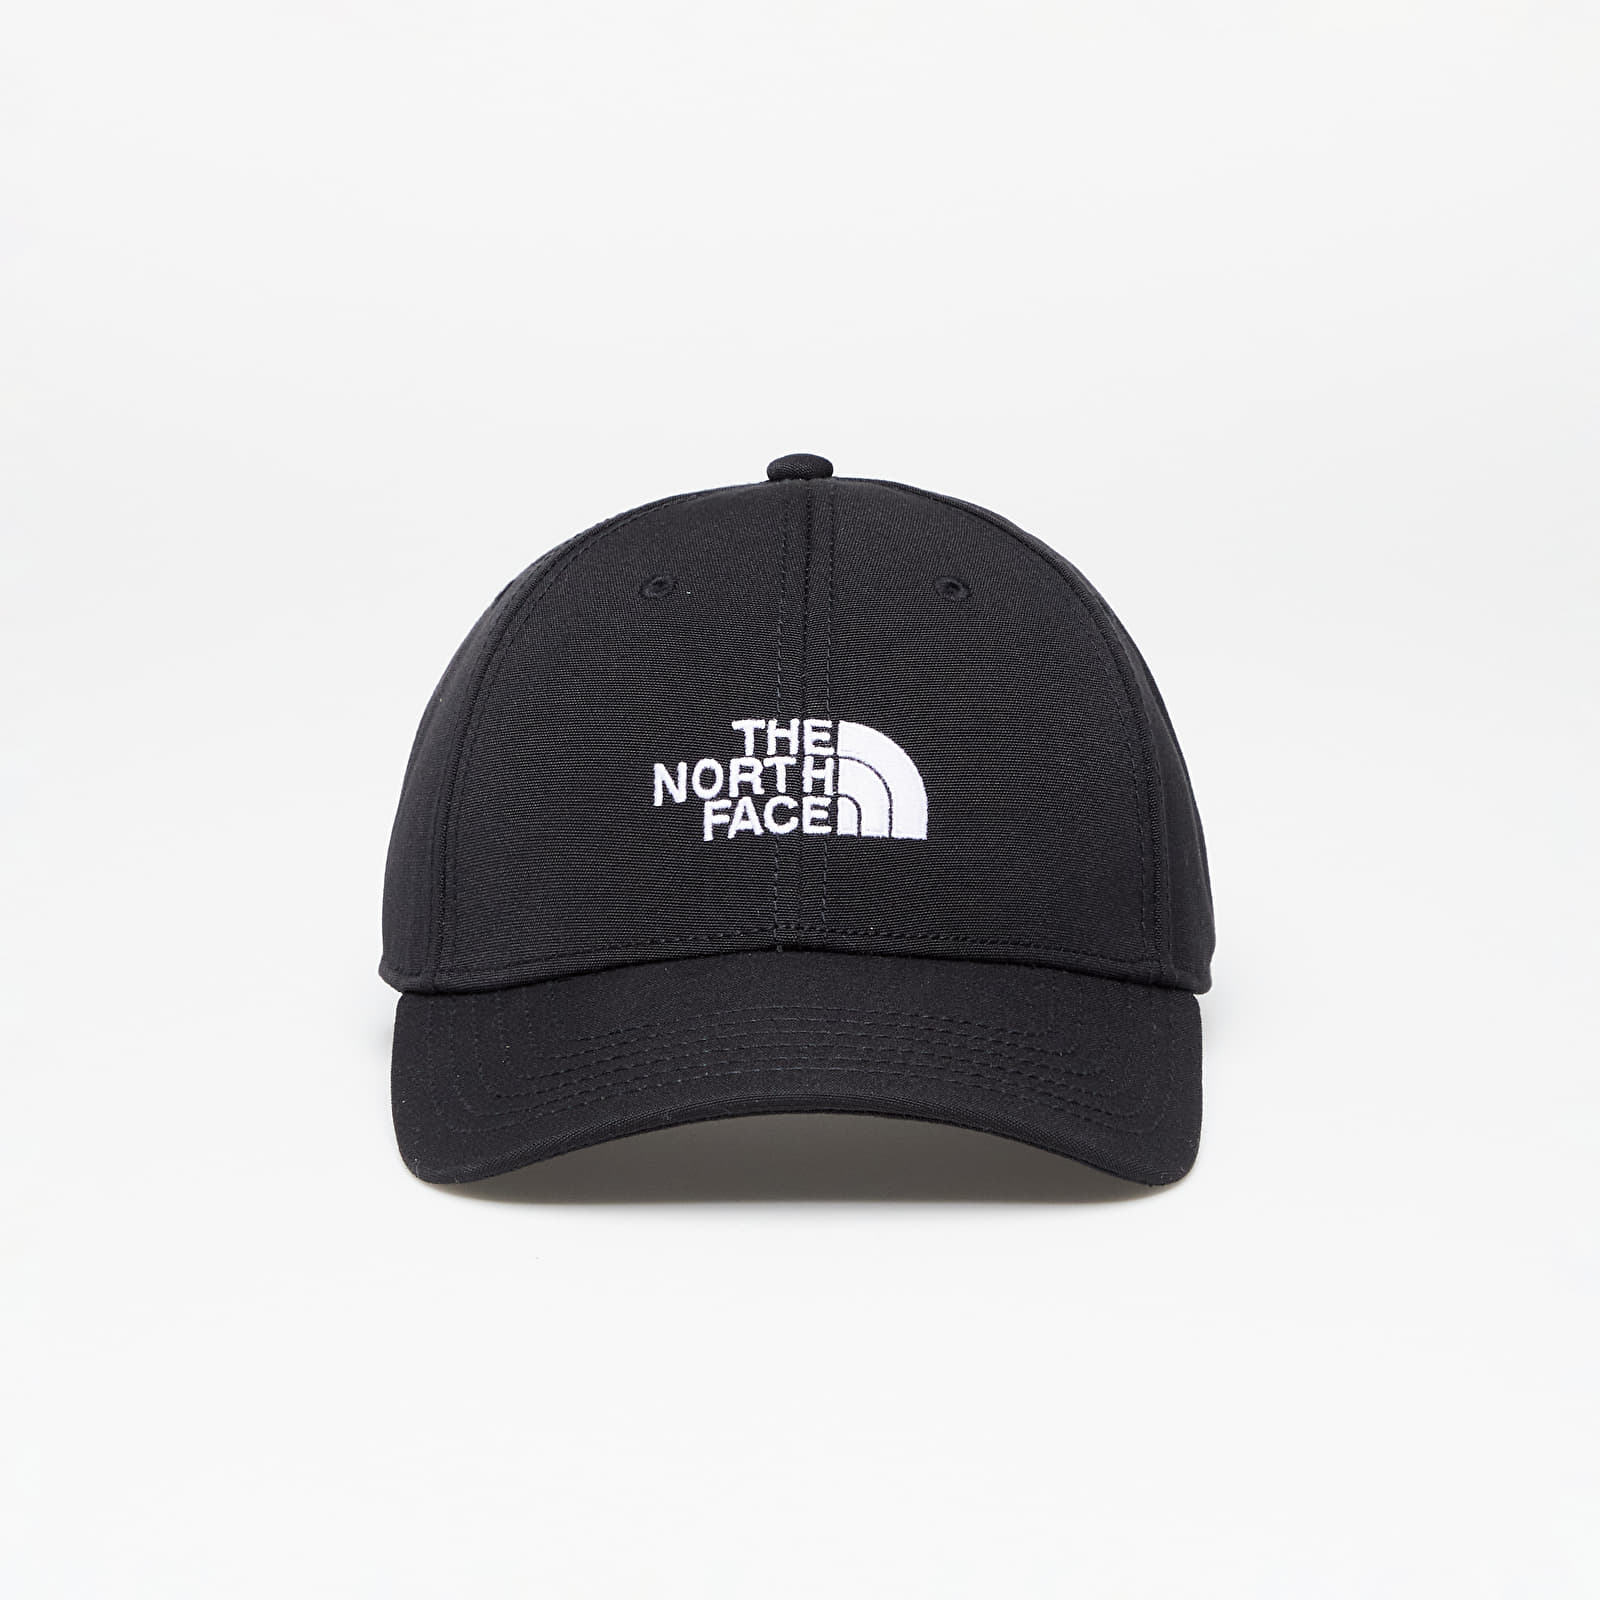 Hat | Footshop Tnf Caps The North White Recycled Black/Tnf Classic 66 Face